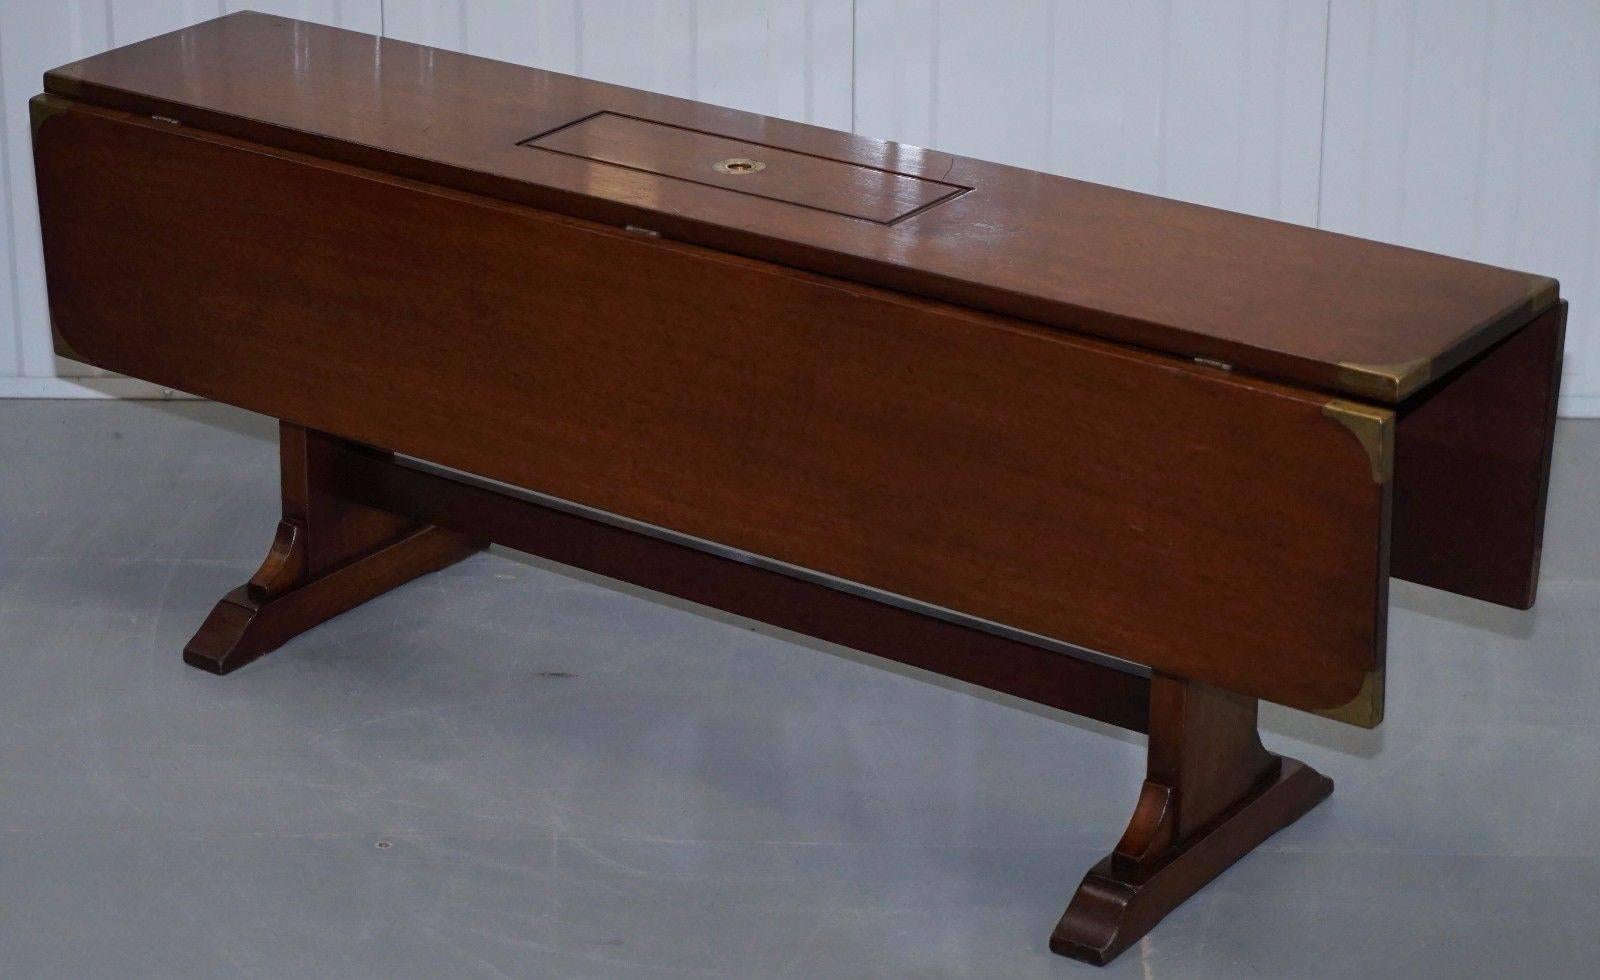 We are delighted to offer for sale this stunning extending military campaign coffee table made from solid mahogany and fitted with brass hard wear

A very good looking piece in pretty much perfect unmarked condition, the brass fittings are nice